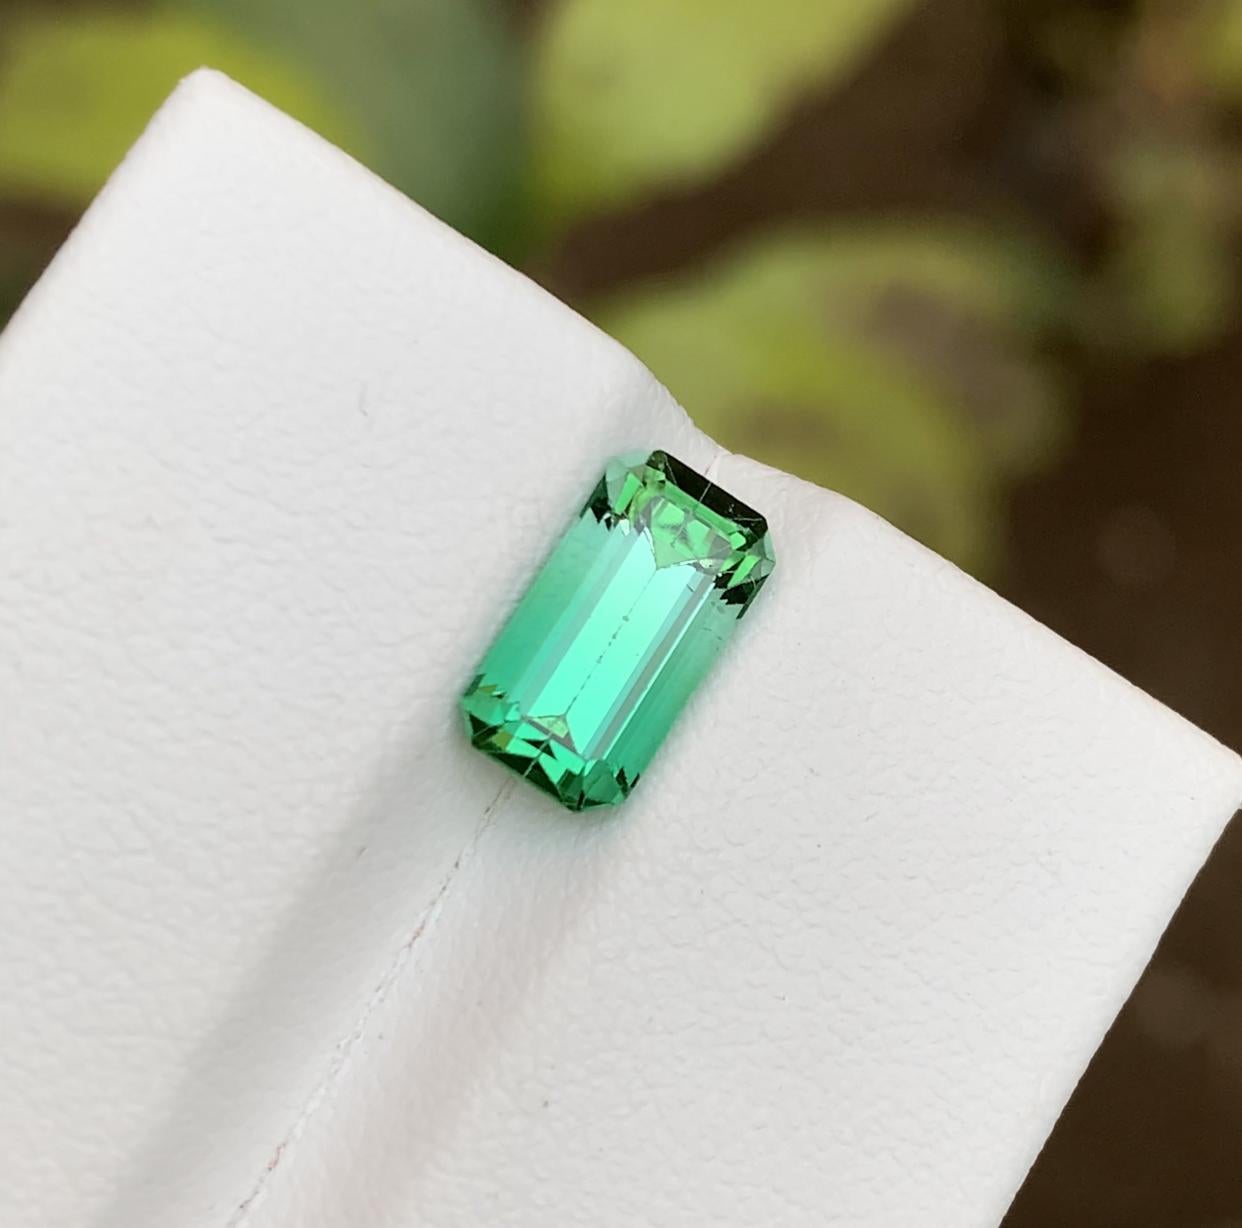 GEMSTONE TYPE: Tourmaline
PIECE(S): 1
WEIGHT: 2.25 Carats
SHAPE: Step Emerald
SIZE (MM):  9.84 x 5.37 x 5.02
COLOR: Neon Bluish Green Bicolor
CLARITY: Approx 95% Eye Clean
TREATMENT: None
ORIGIN: Afghanistan
CERTIFICATE: On demand

This dazzling